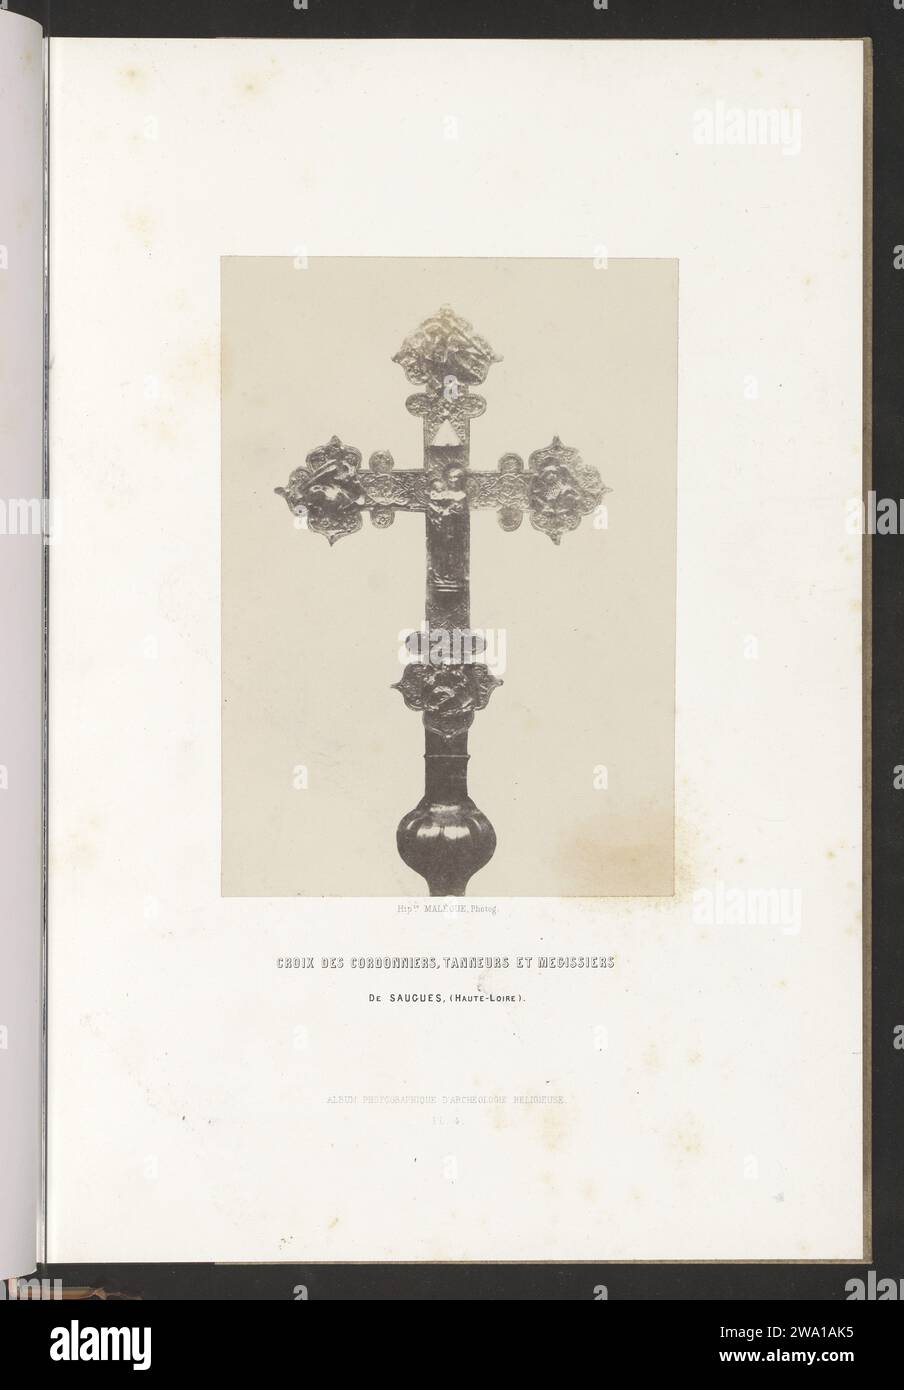 Crucifix from Saugues, c. 1850 - in or before 1857 photograph  France photographic support salted paper print crucifix  personal devotion. Madonna: i.e. Mary with the Christ-child Stock Photo